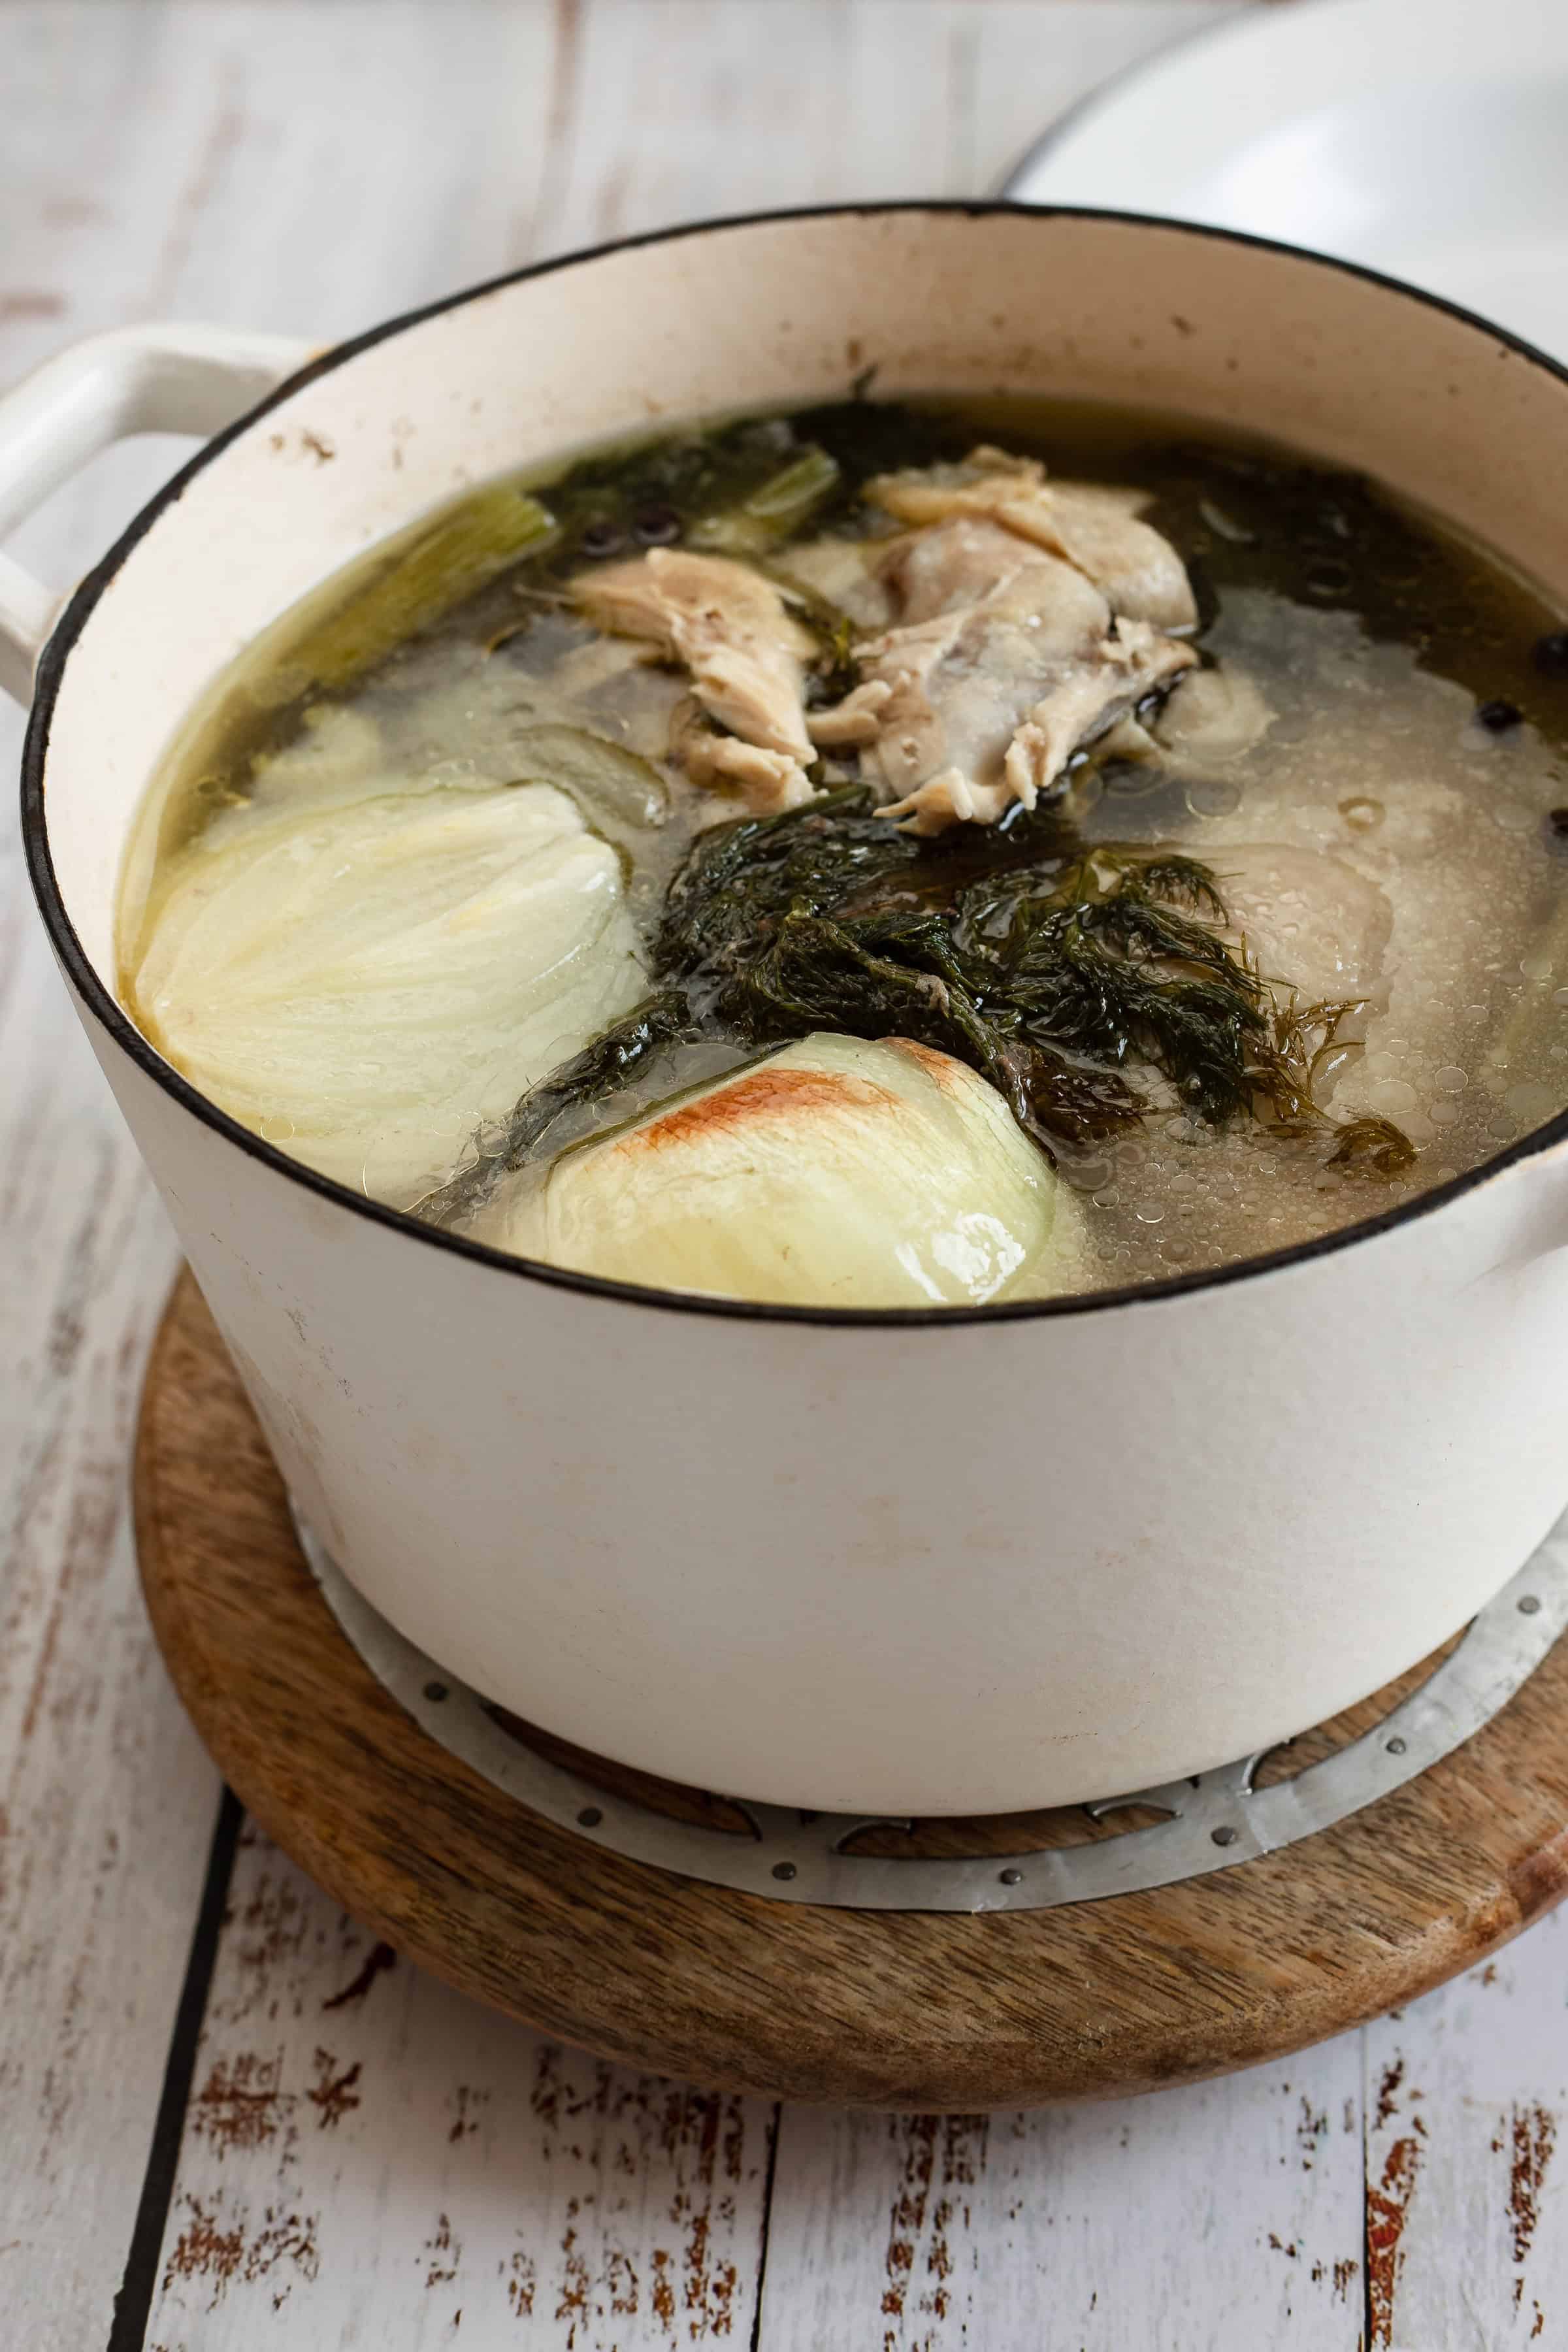 A pot of chicken soup on a wooden table, featuring whole chicken pieces, onions, and leafy greens simmering in a clear broth.